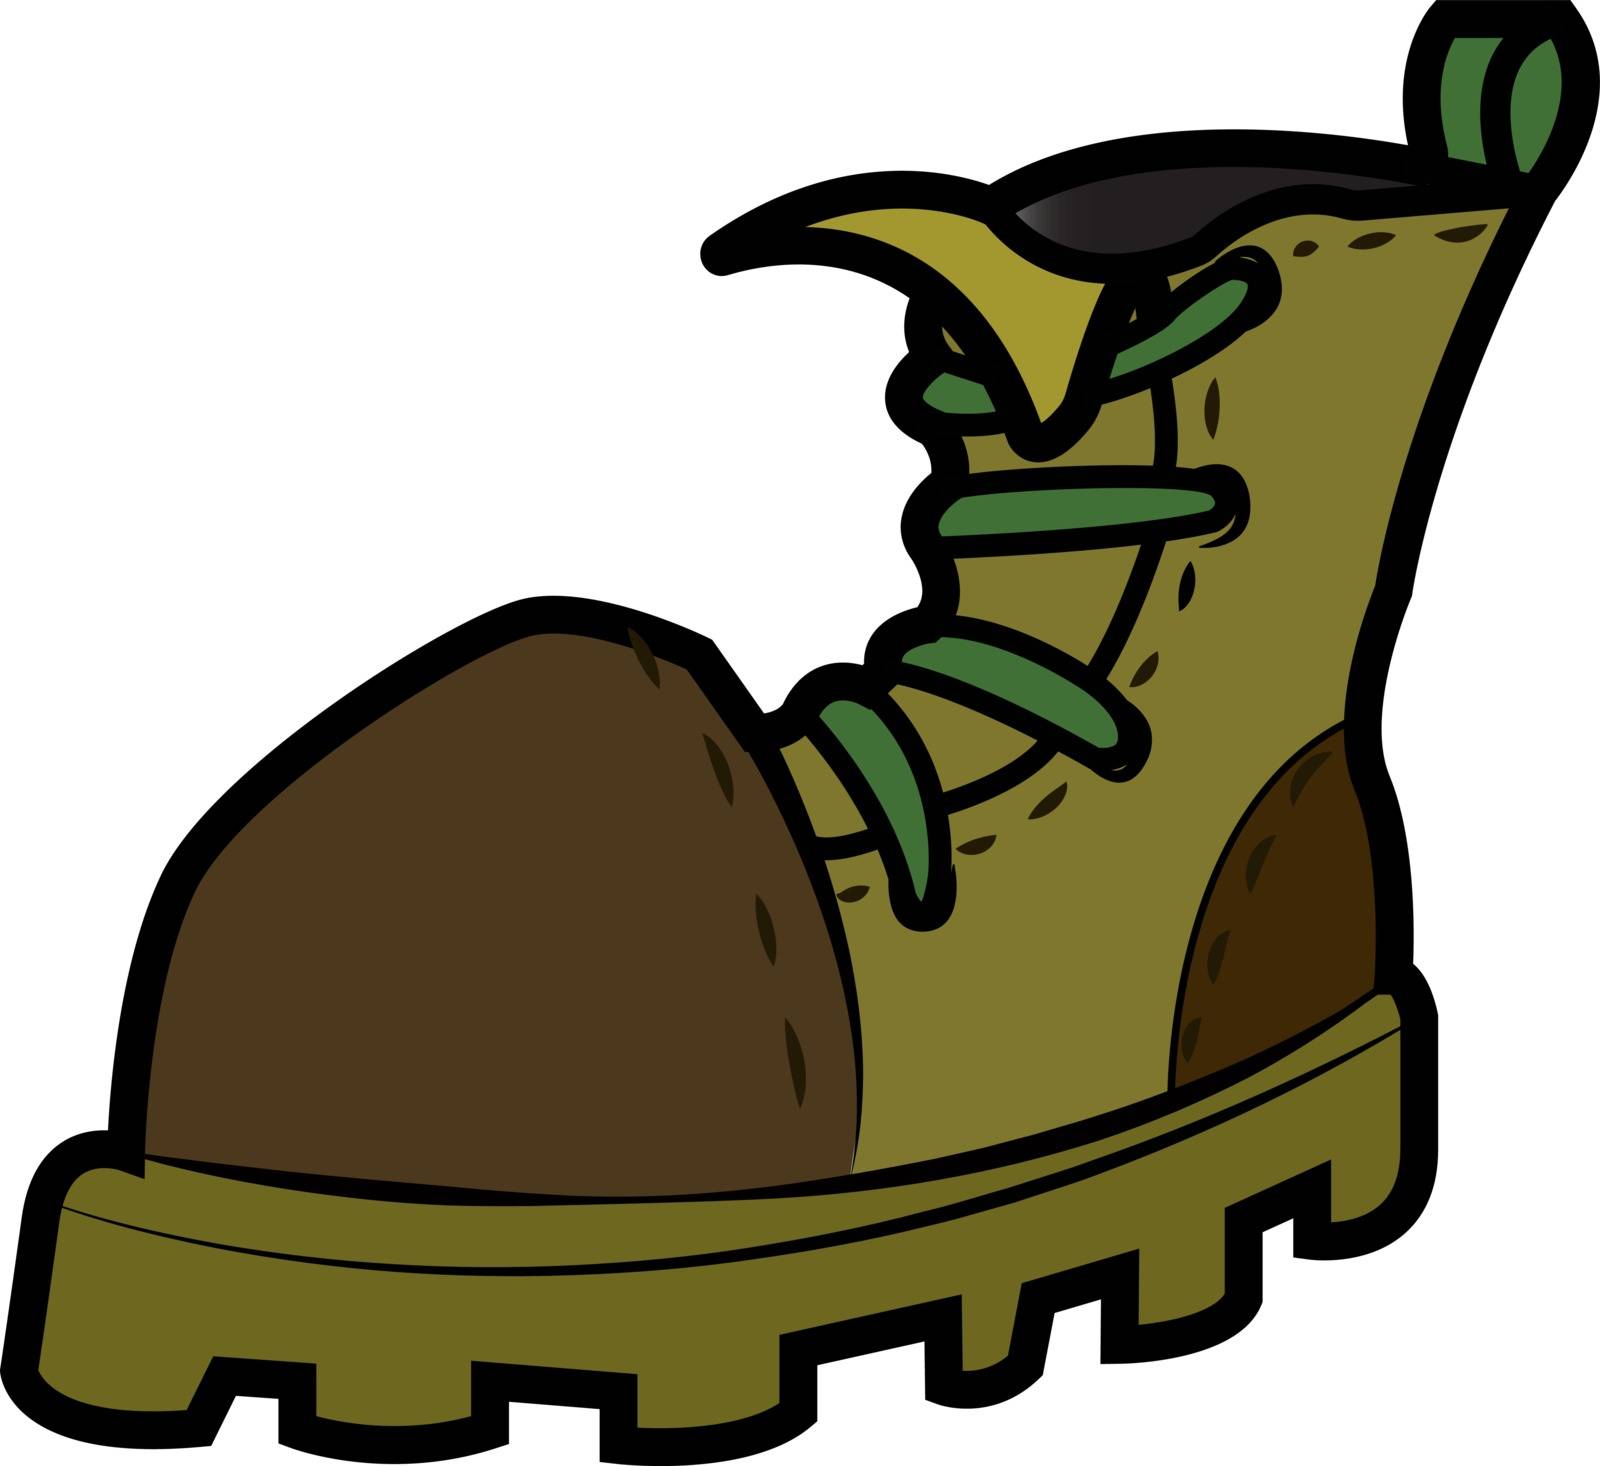 High ankle army boot vector or color illustration by Morphart